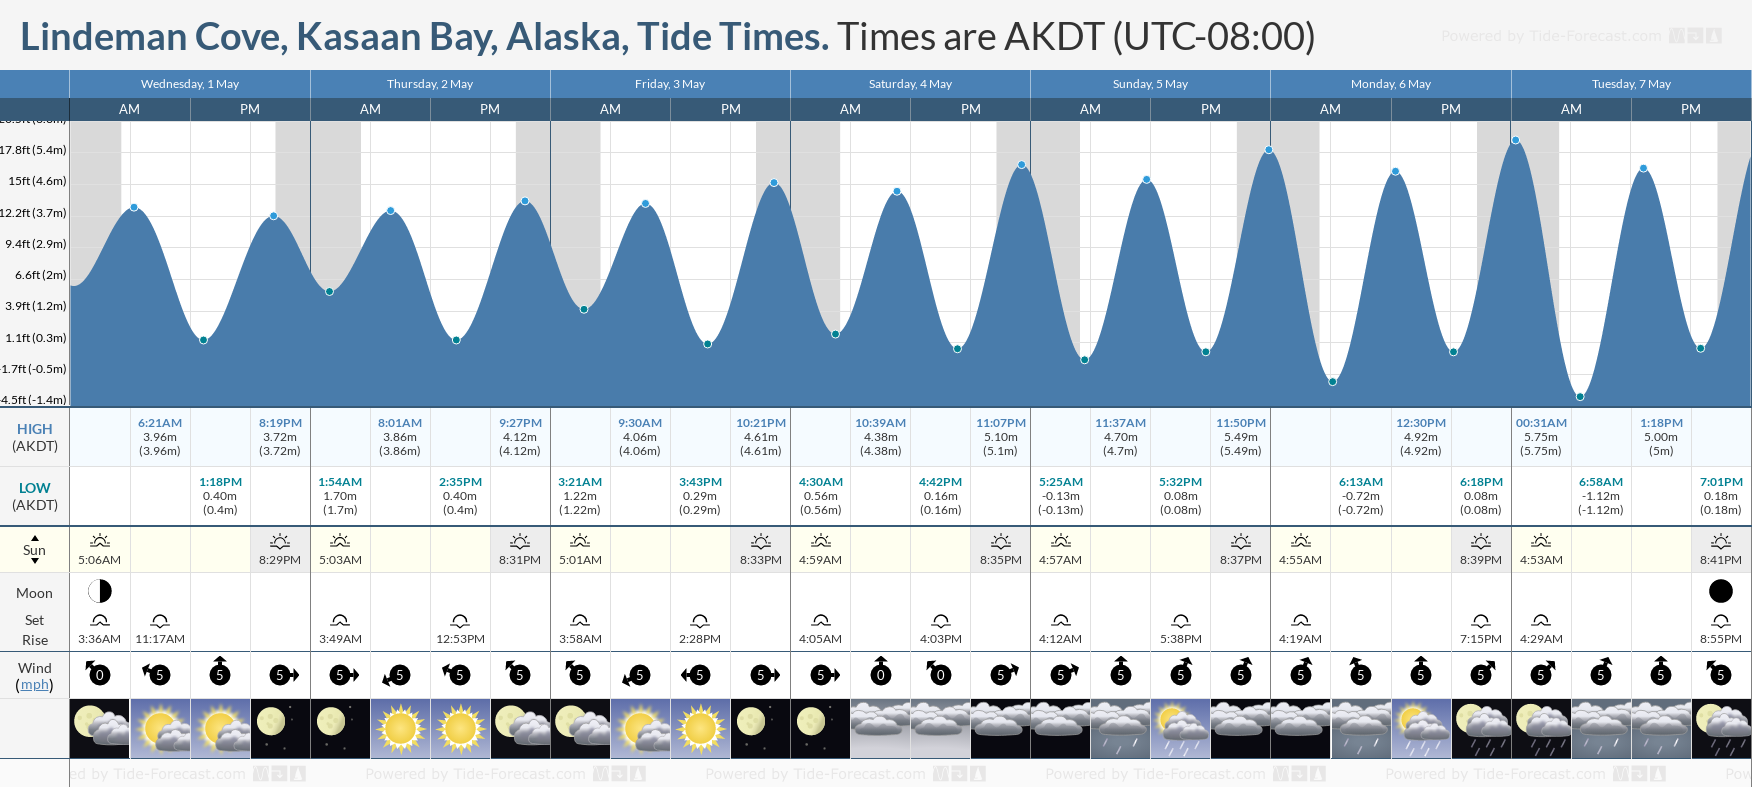 Lindeman Cove, Kasaan Bay, Alaska Tide Chart including high and low tide tide times for the next 7 days